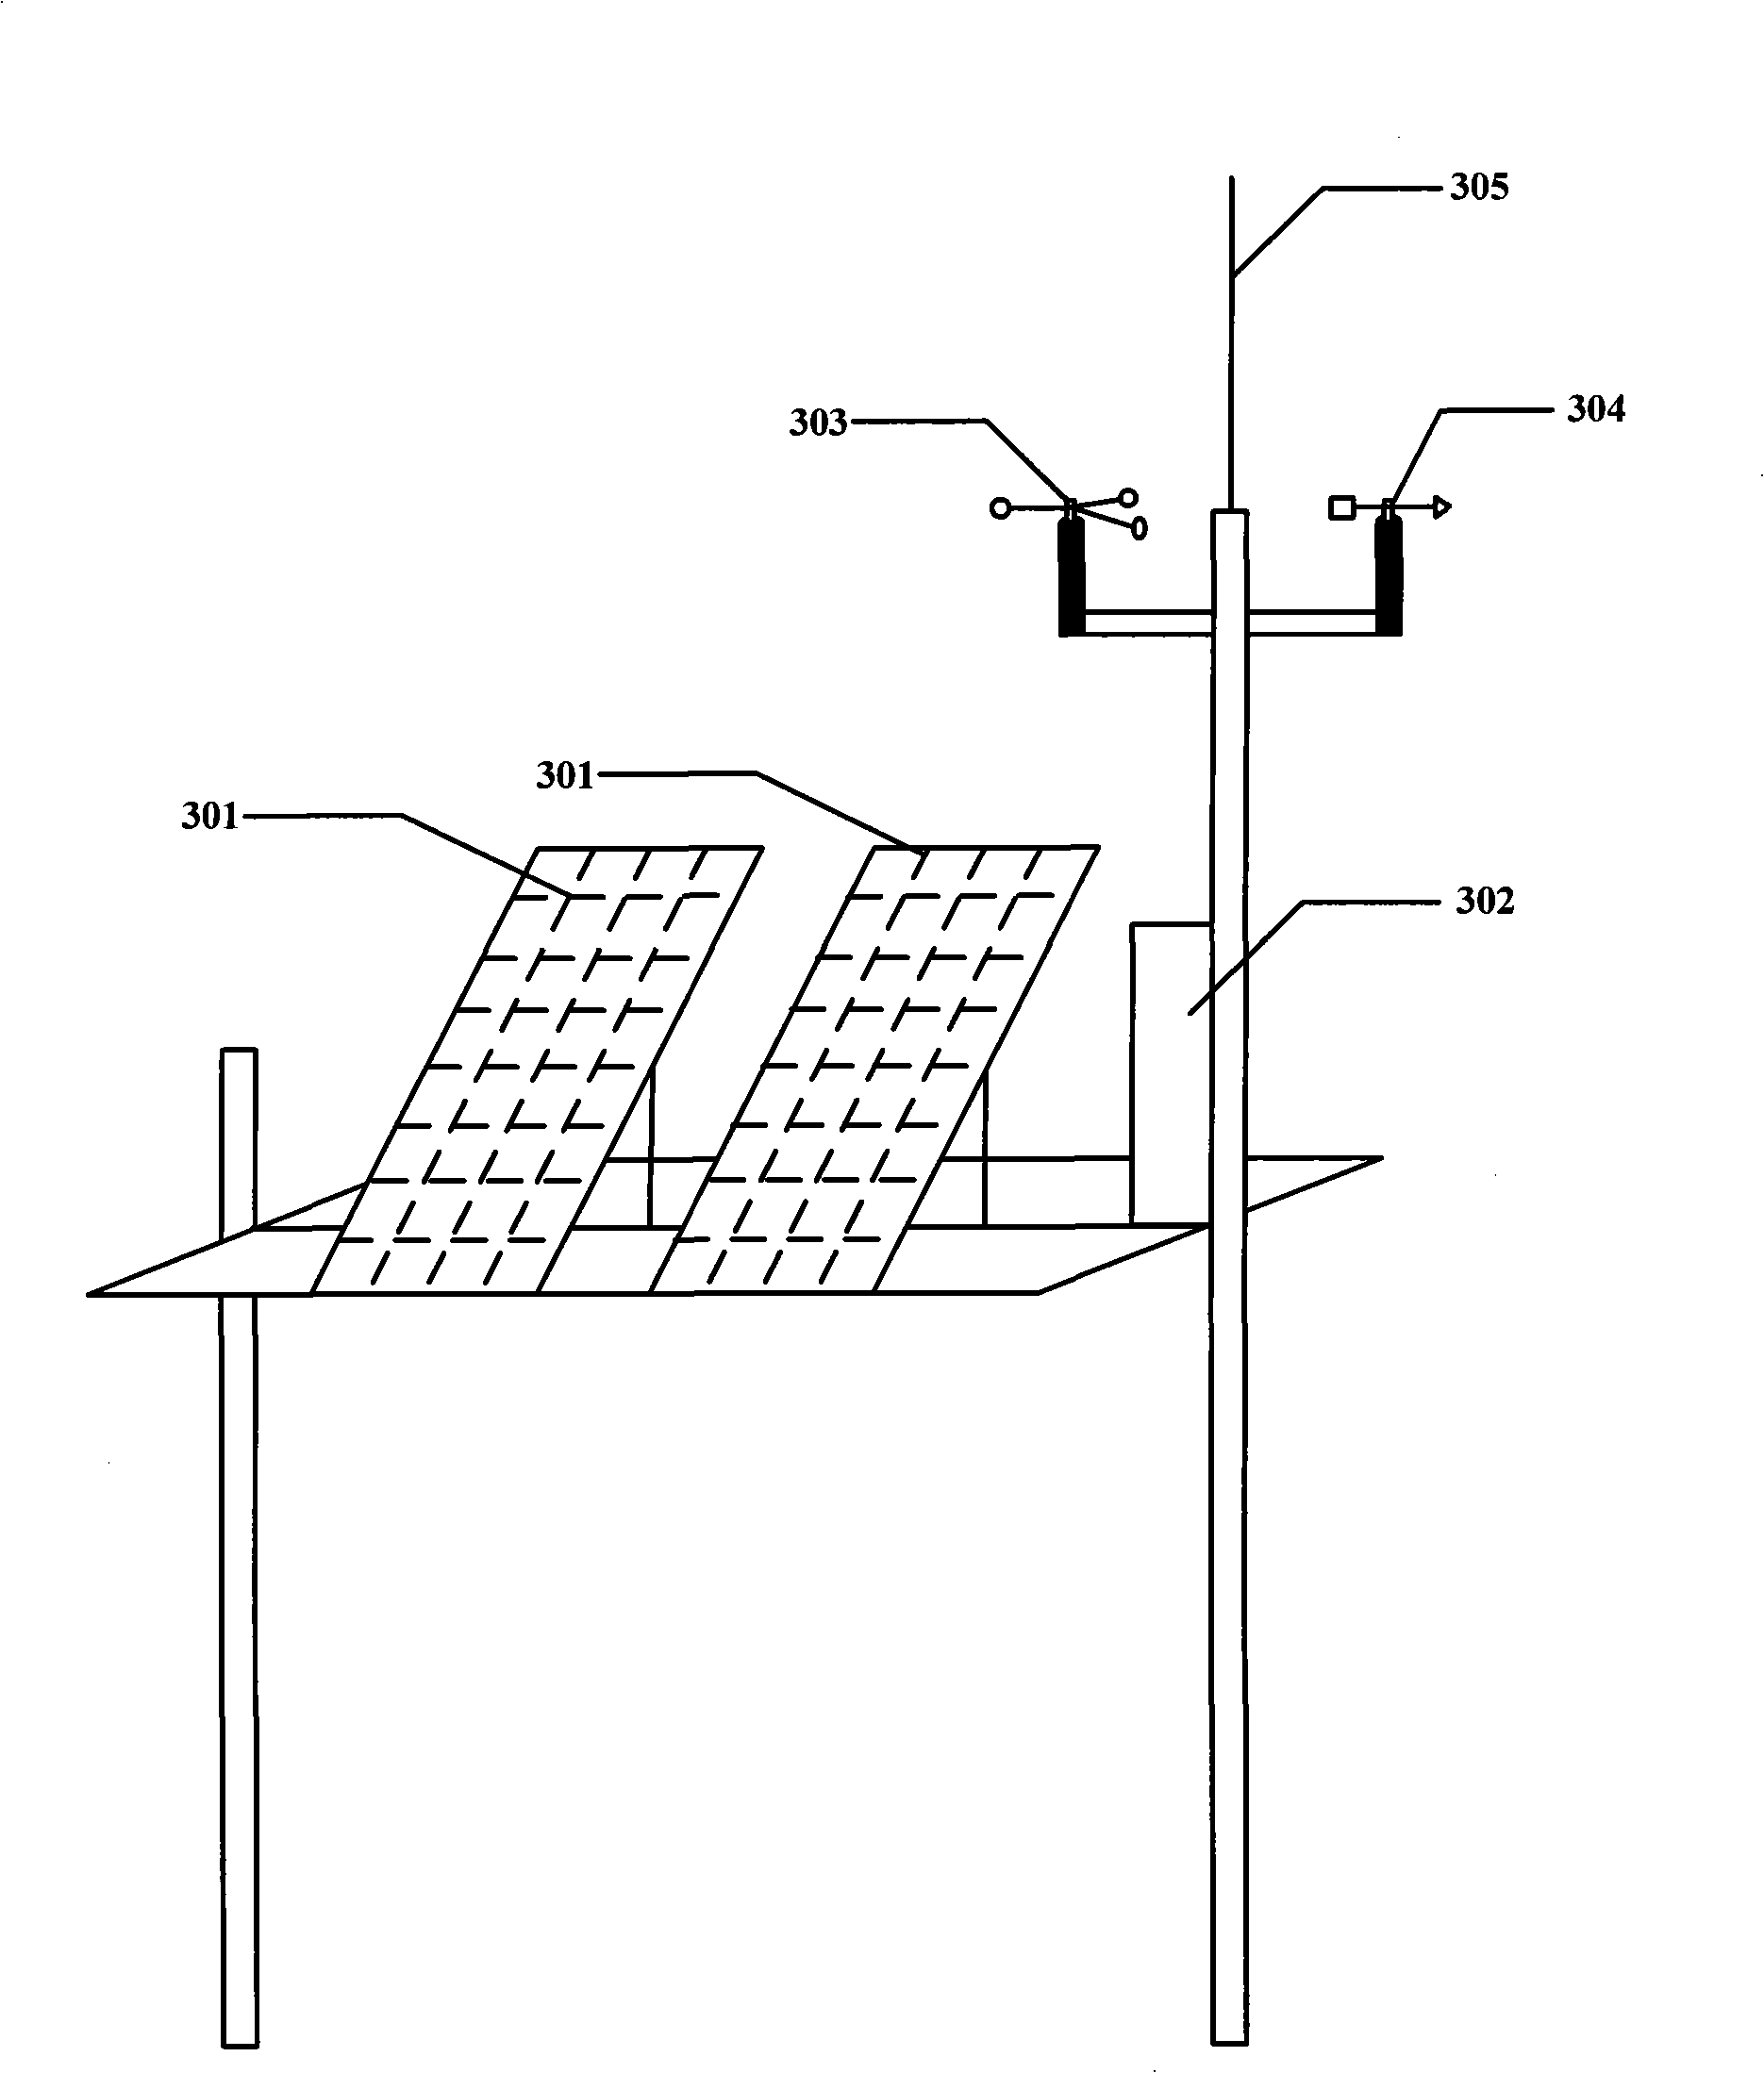 Railway line wind power monitoring system and traveling guide method based on the system